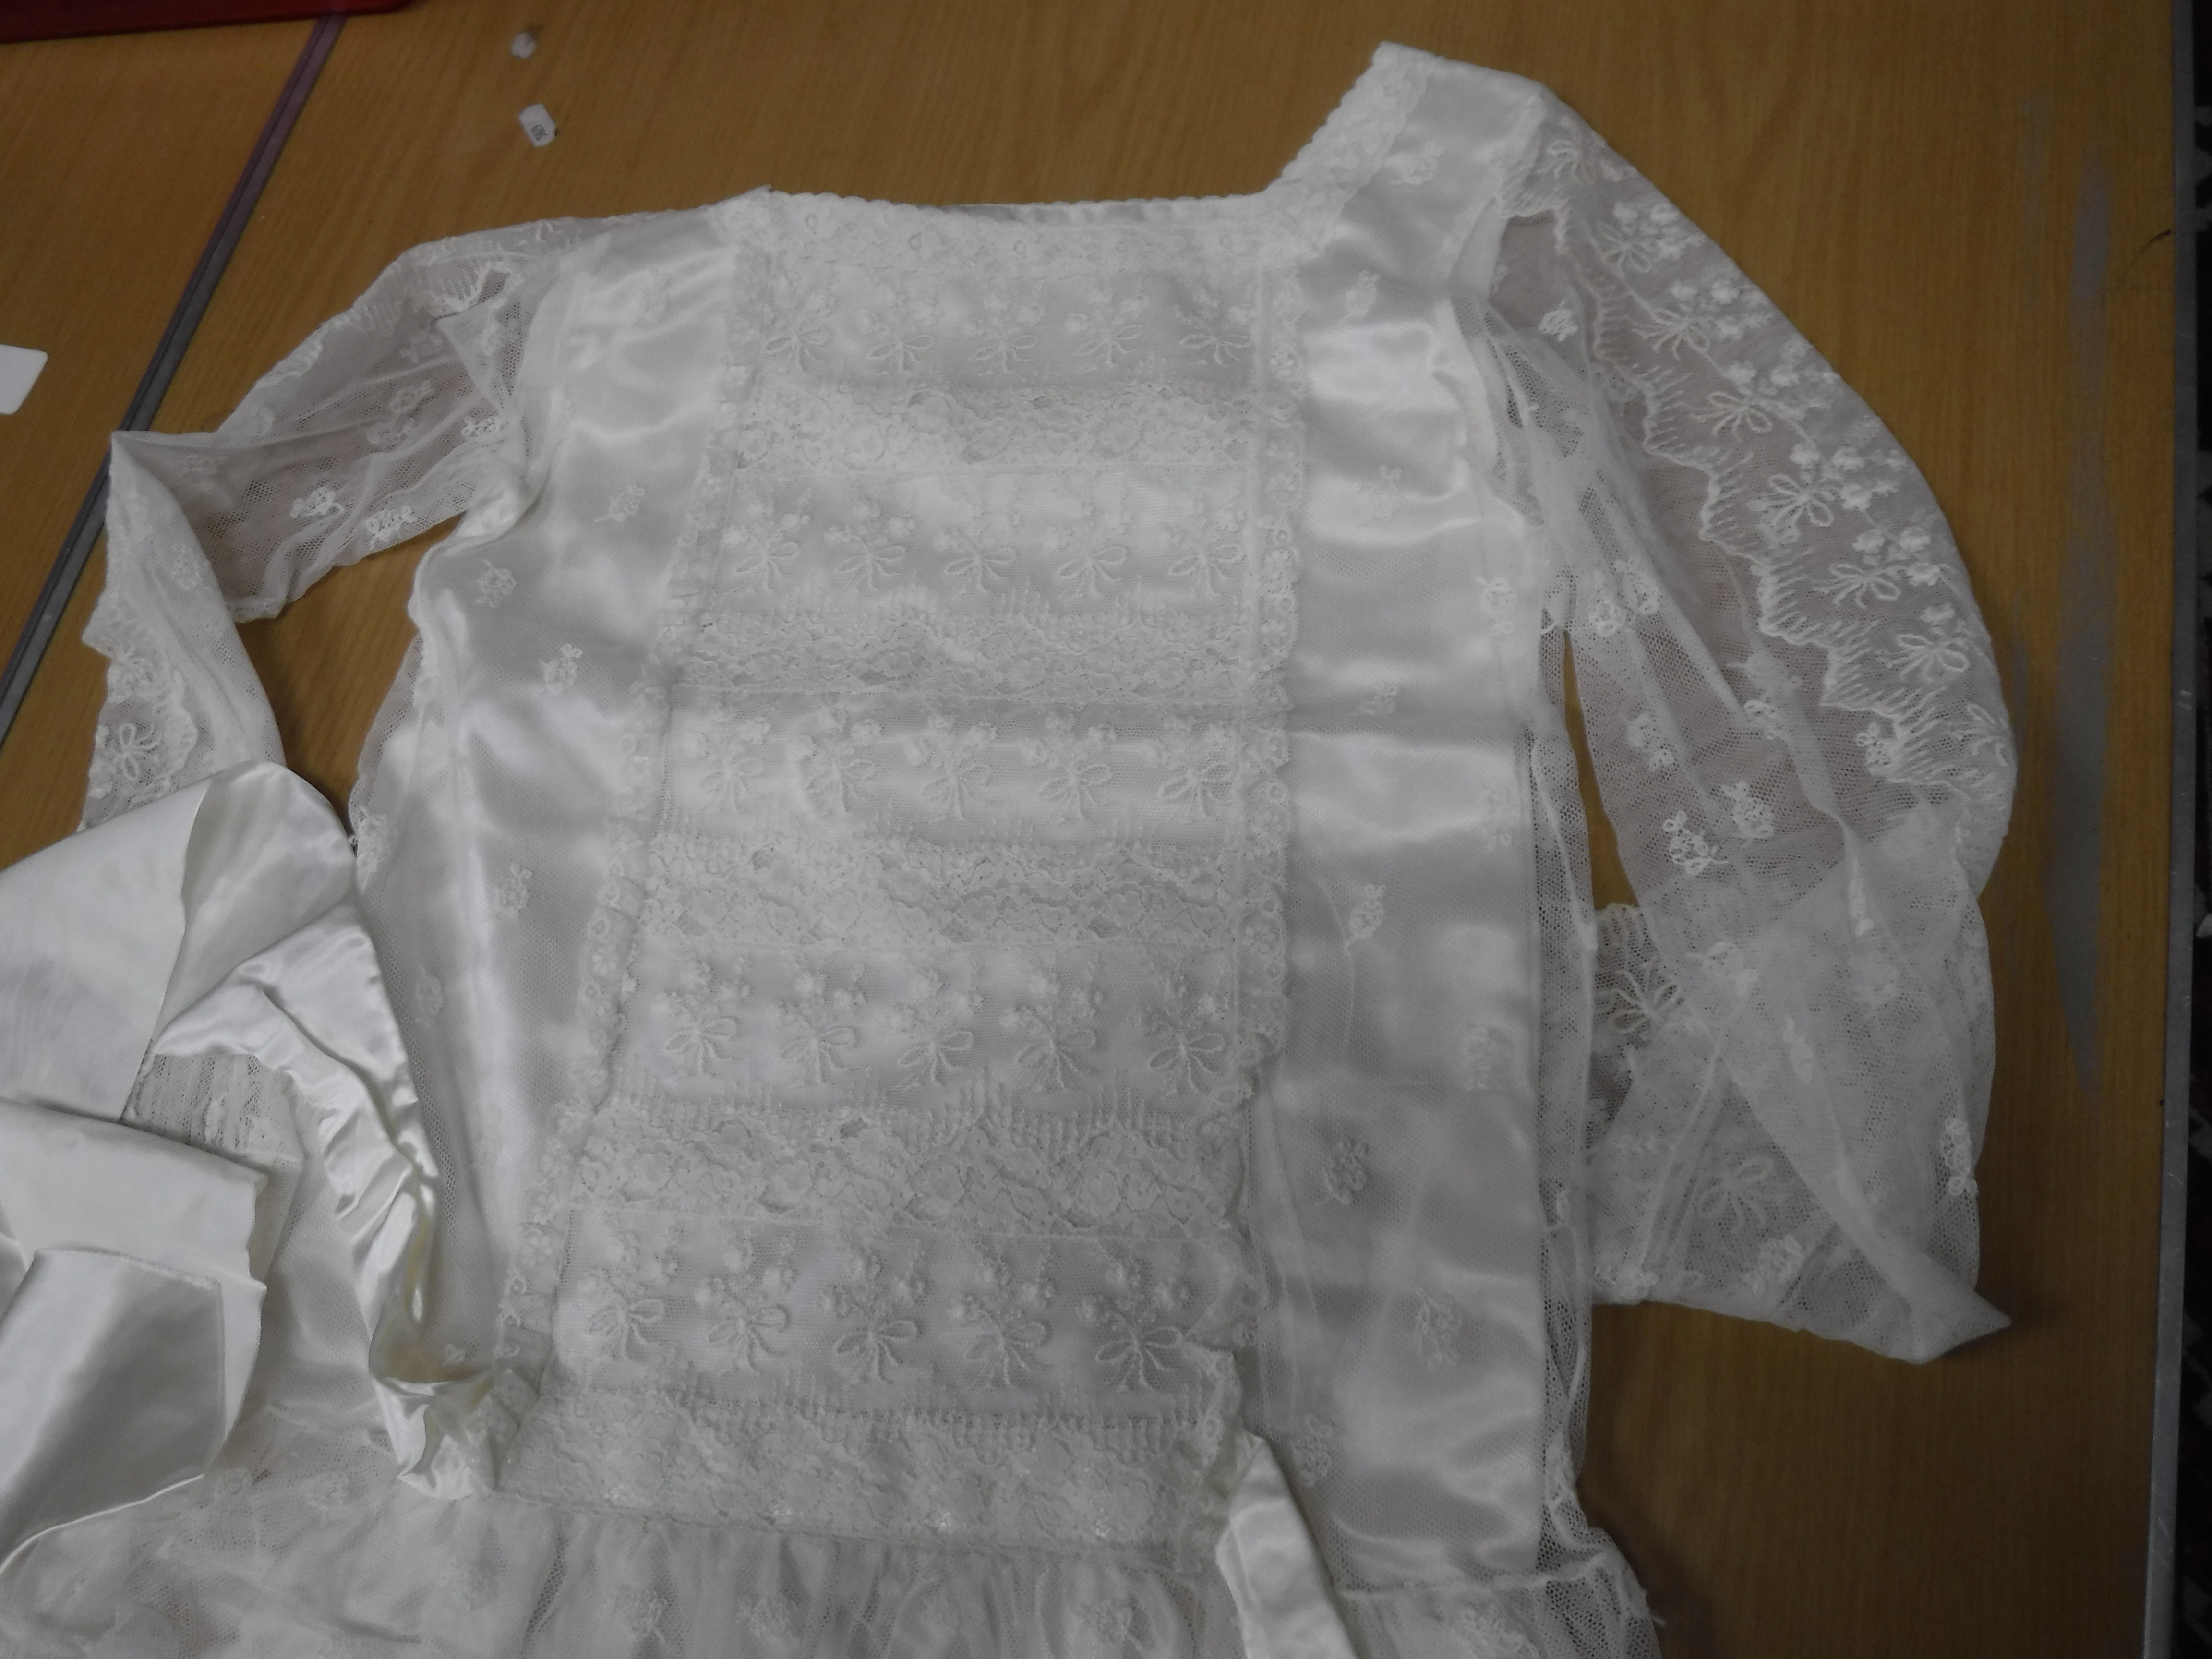 A Lyn Lundie lace work decorated wedding dress in the 1920s style, - Image 7 of 7